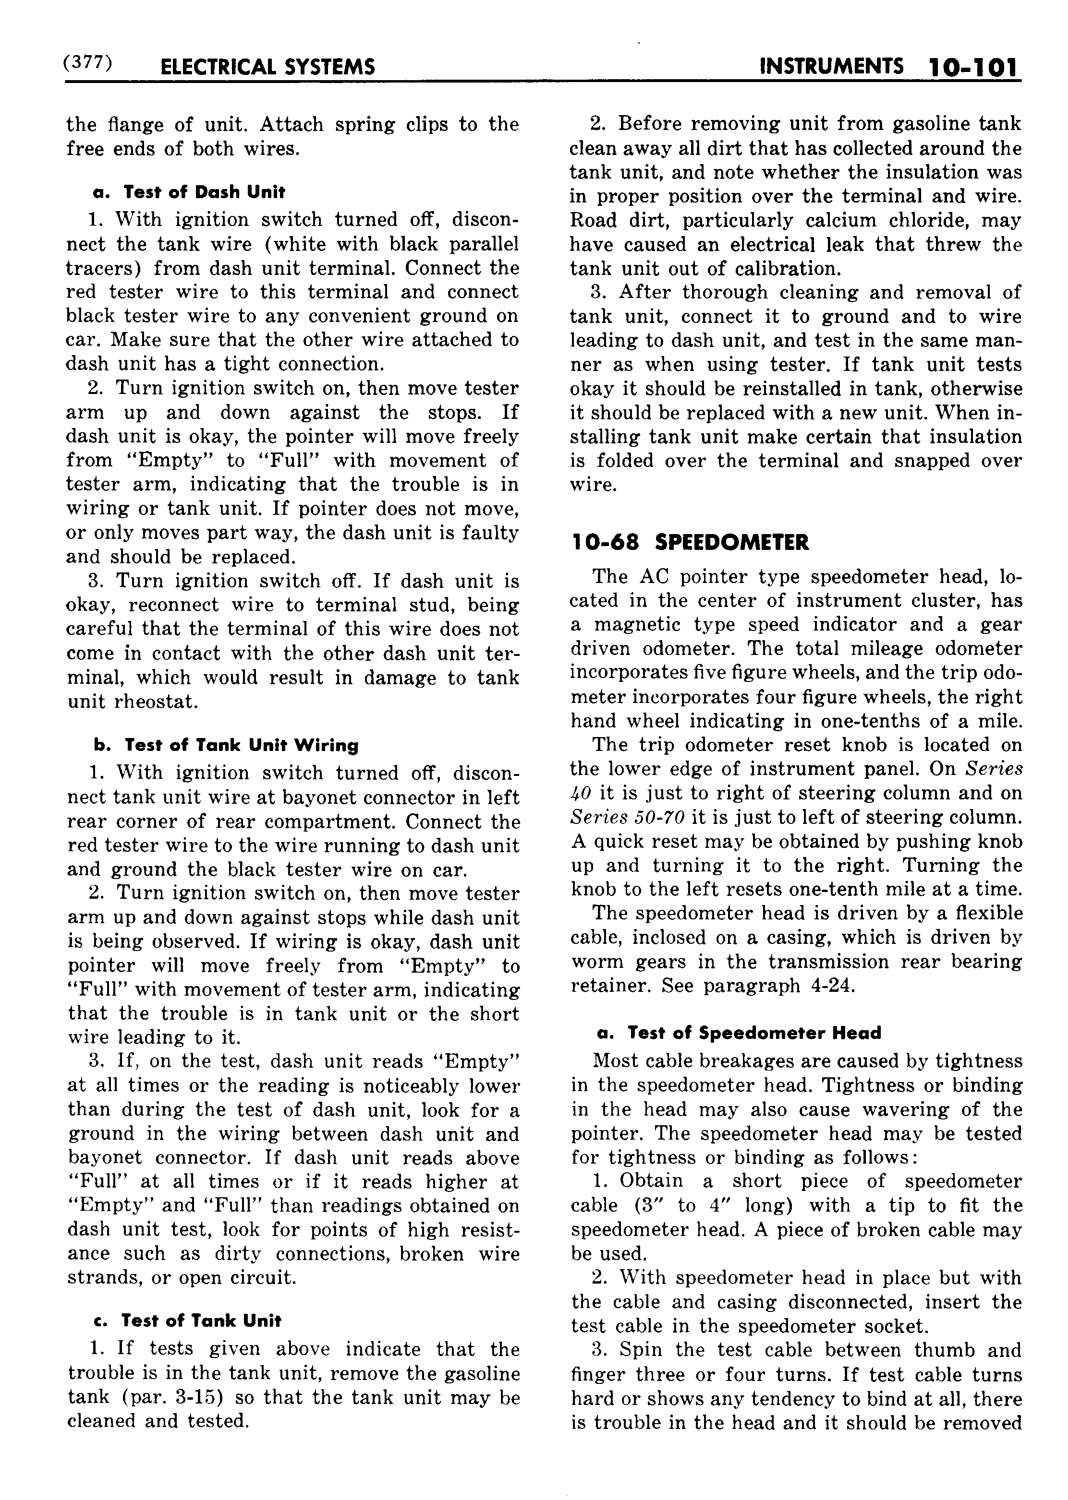 n_11 1948 Buick Shop Manual - Electrical Systems-101-101.jpg